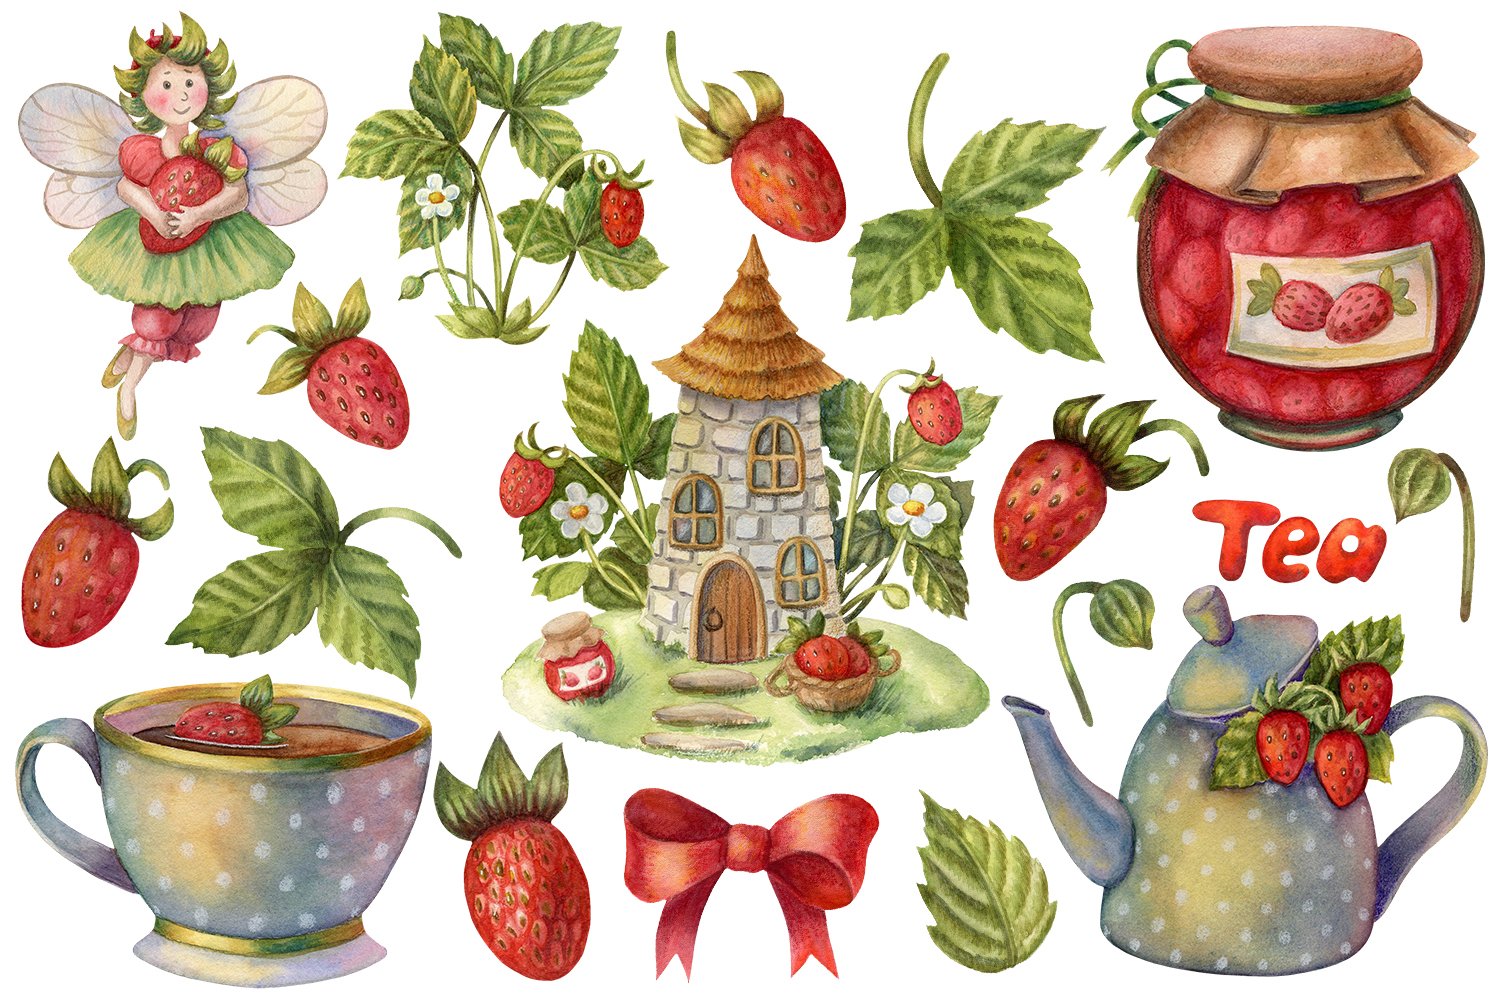 A set of different illustrations of a cup, bow, jam jar, fairy house, teapot and strawberries on a white background.